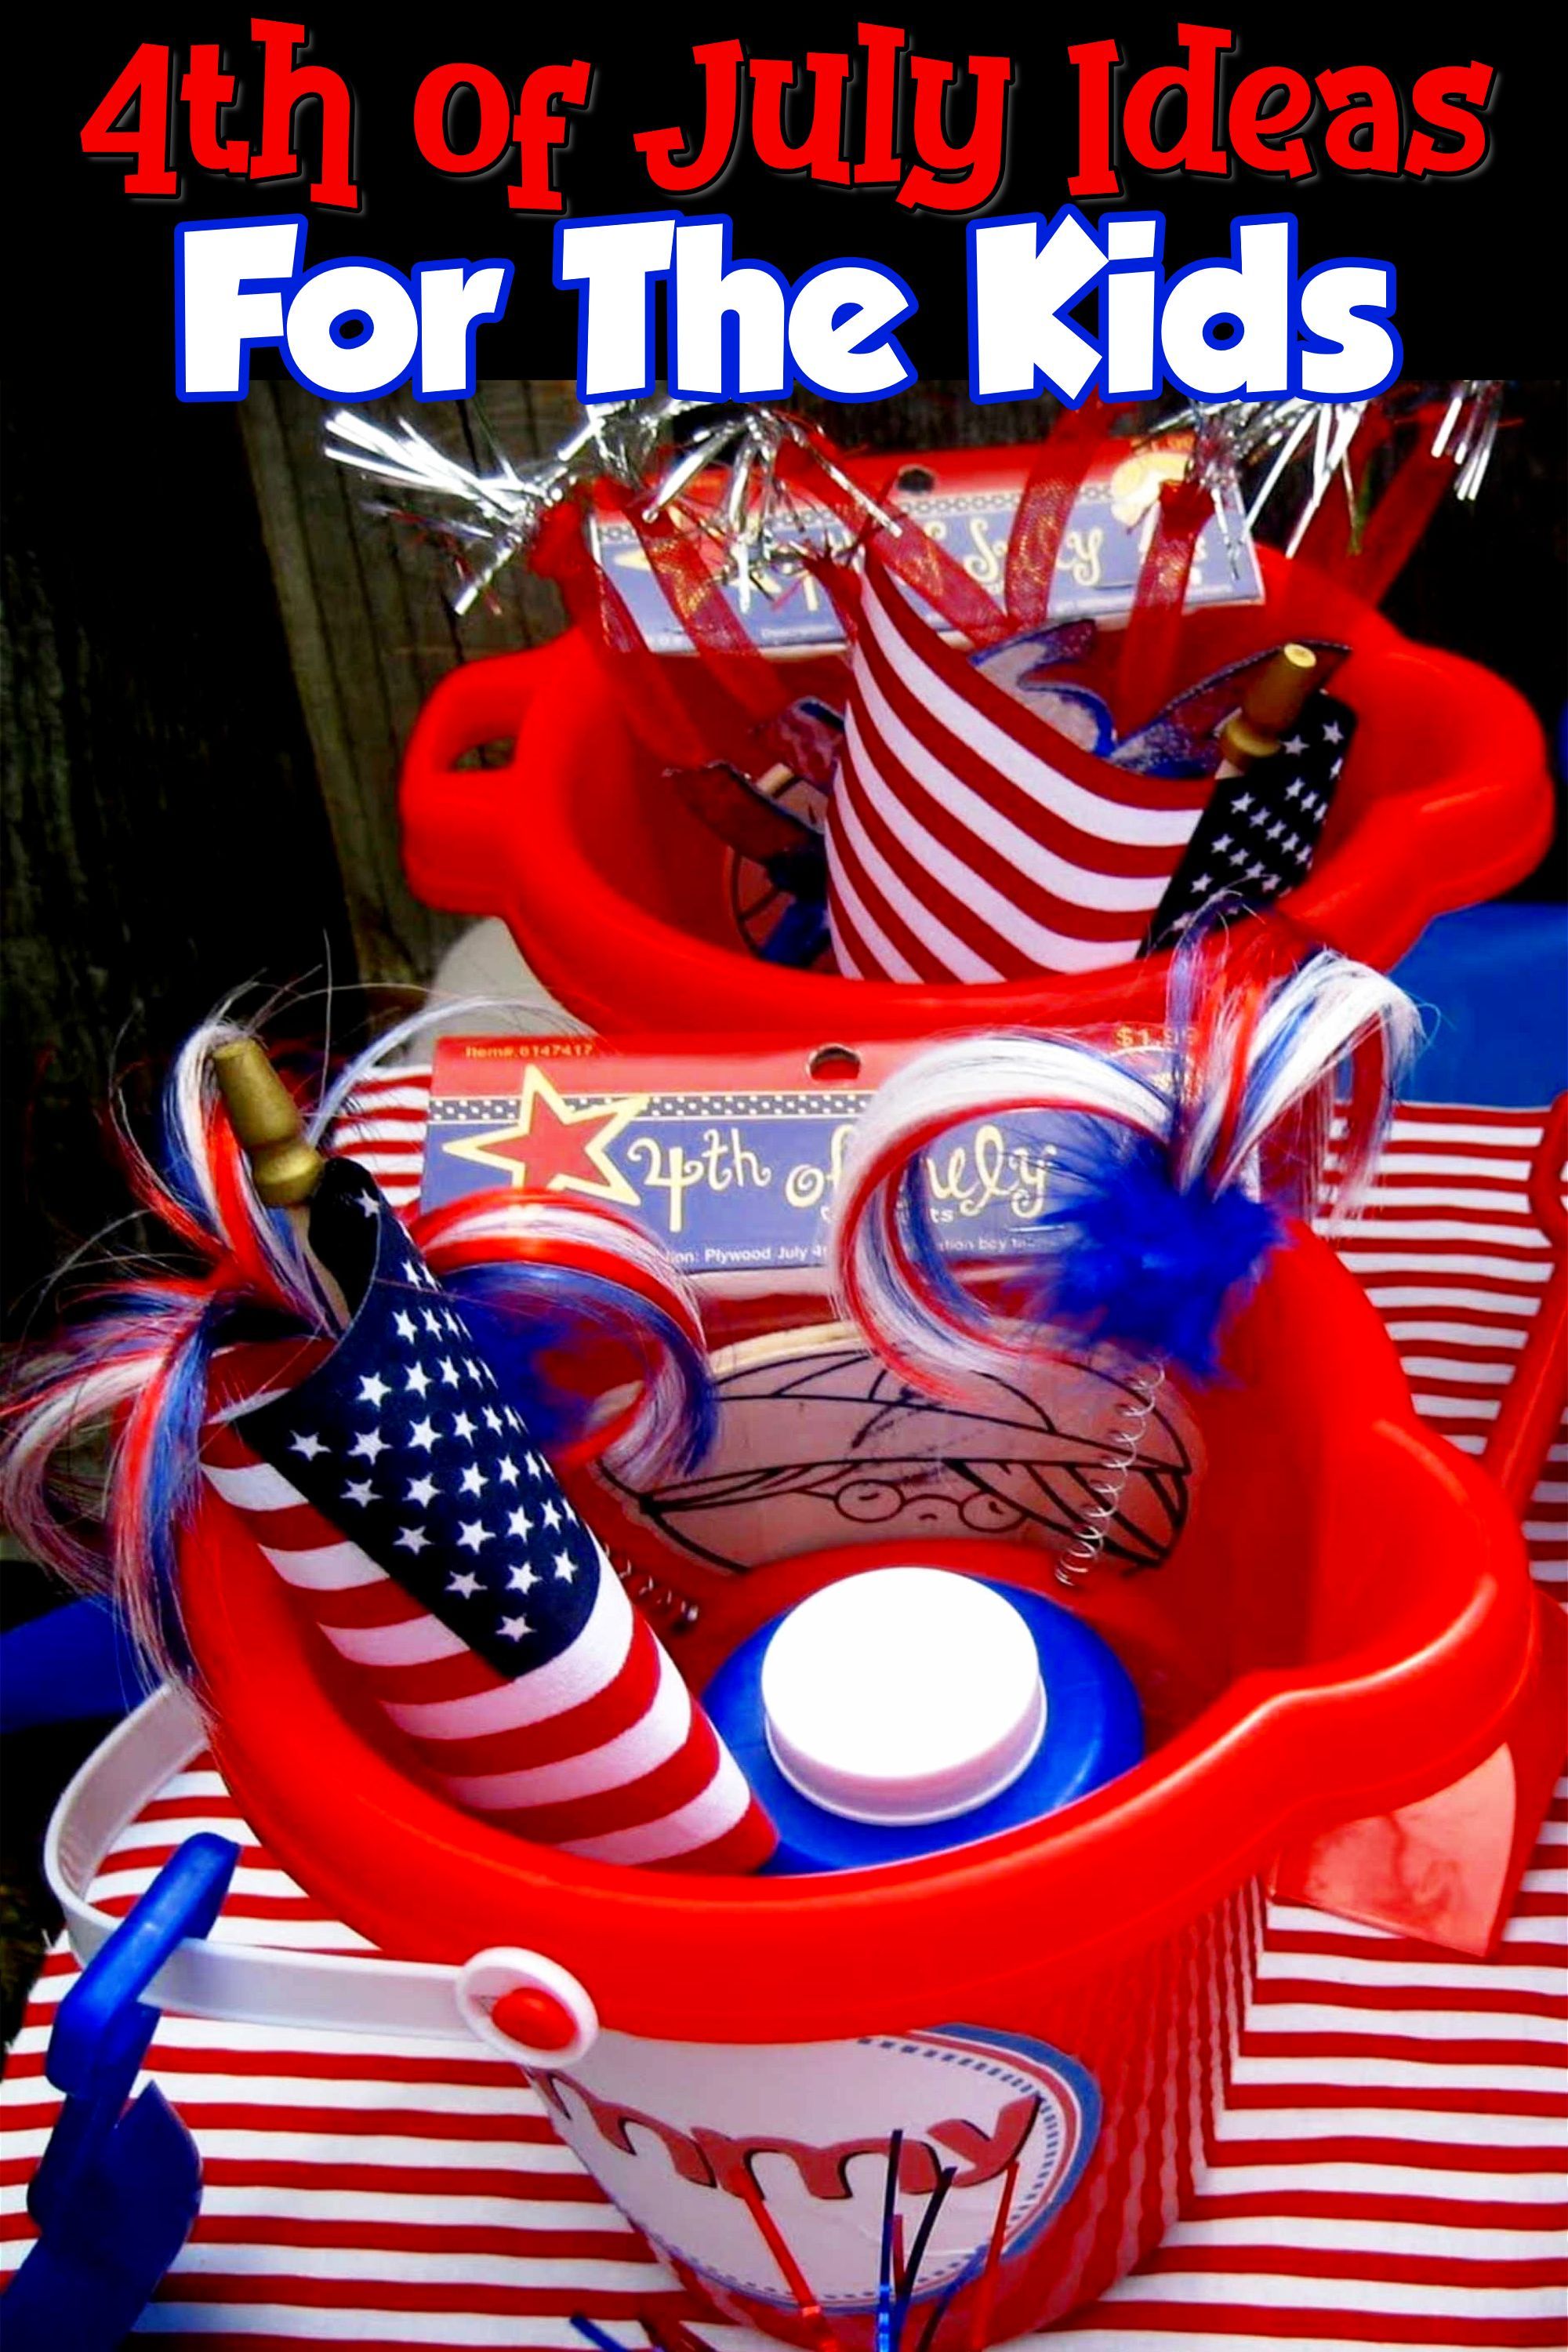 4th of July Party Ideas - Clever DIY Ideas - 4th of July Party Ideas - Clever DIY Ideas -   18 4th of july party ideas